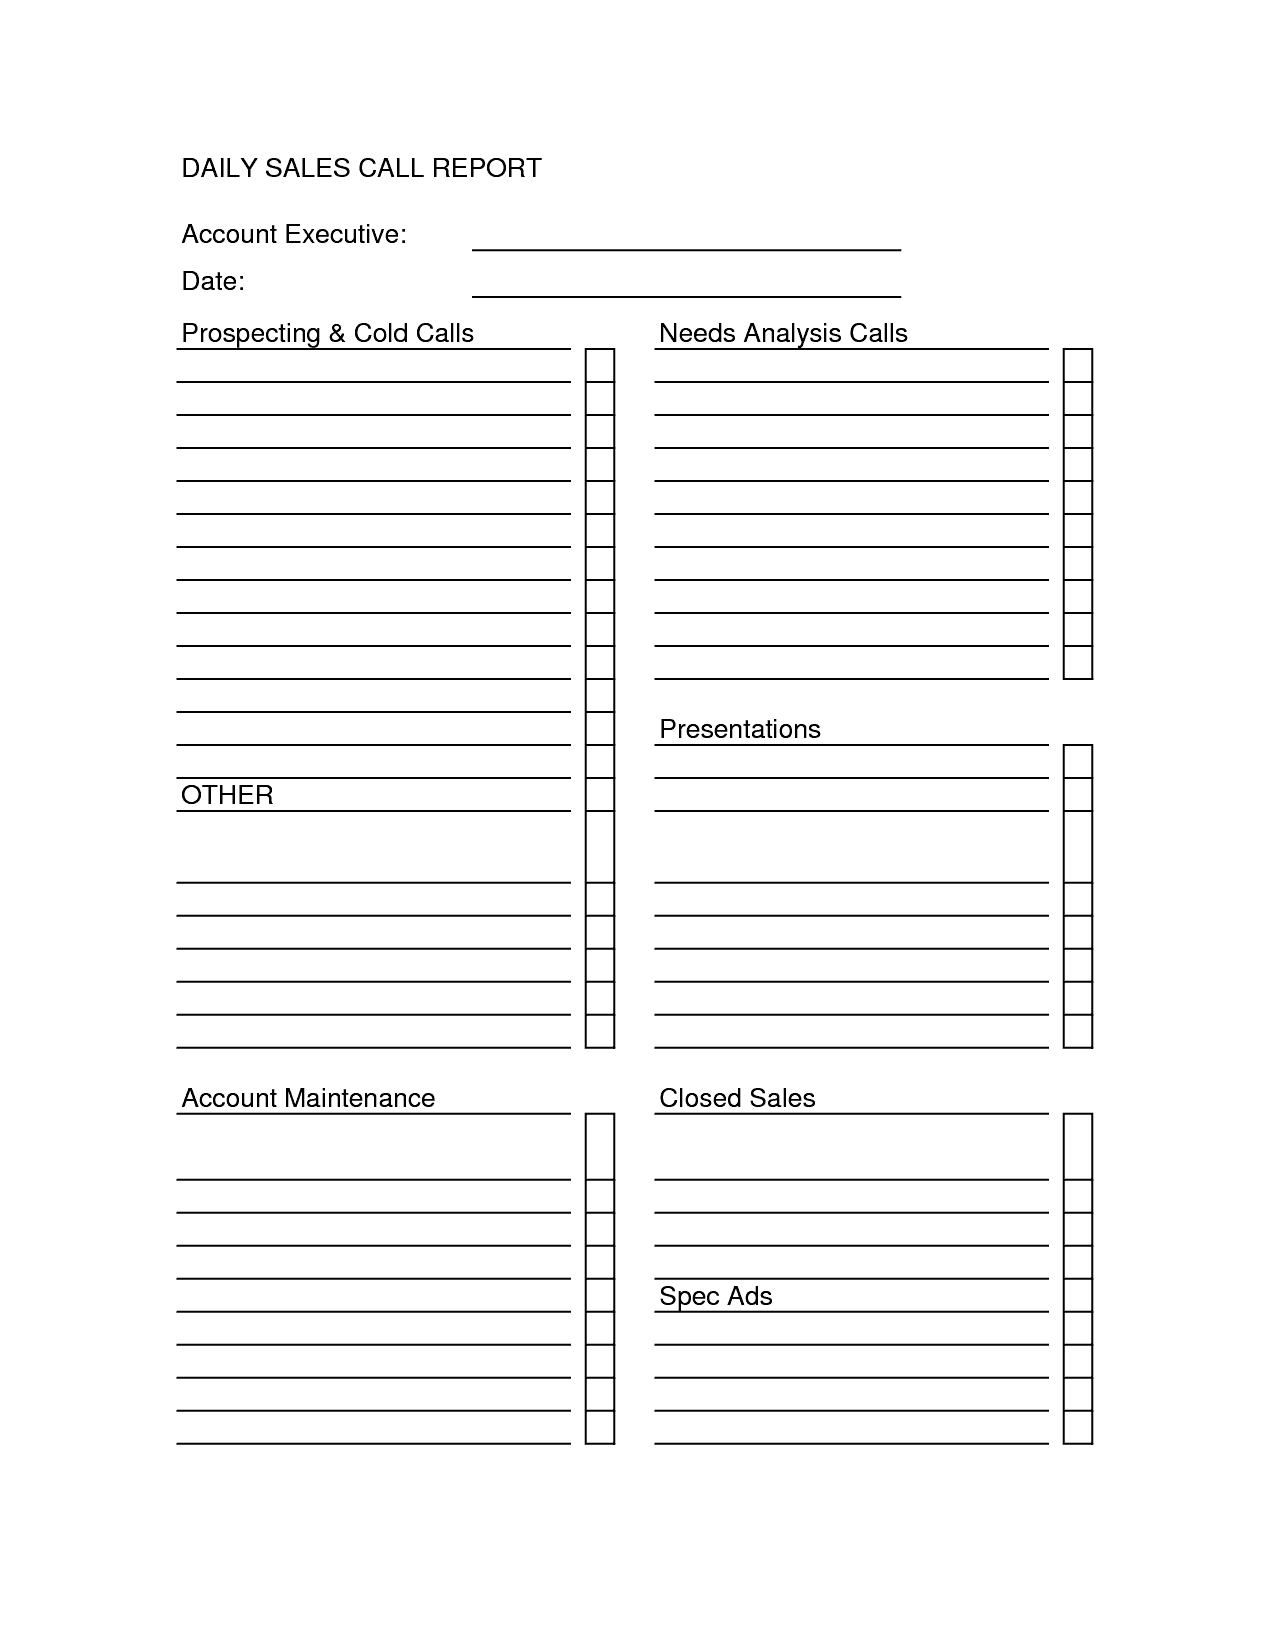 Sales Call Report Templates - Word Excel Fomats With Sales Call Report Template Free